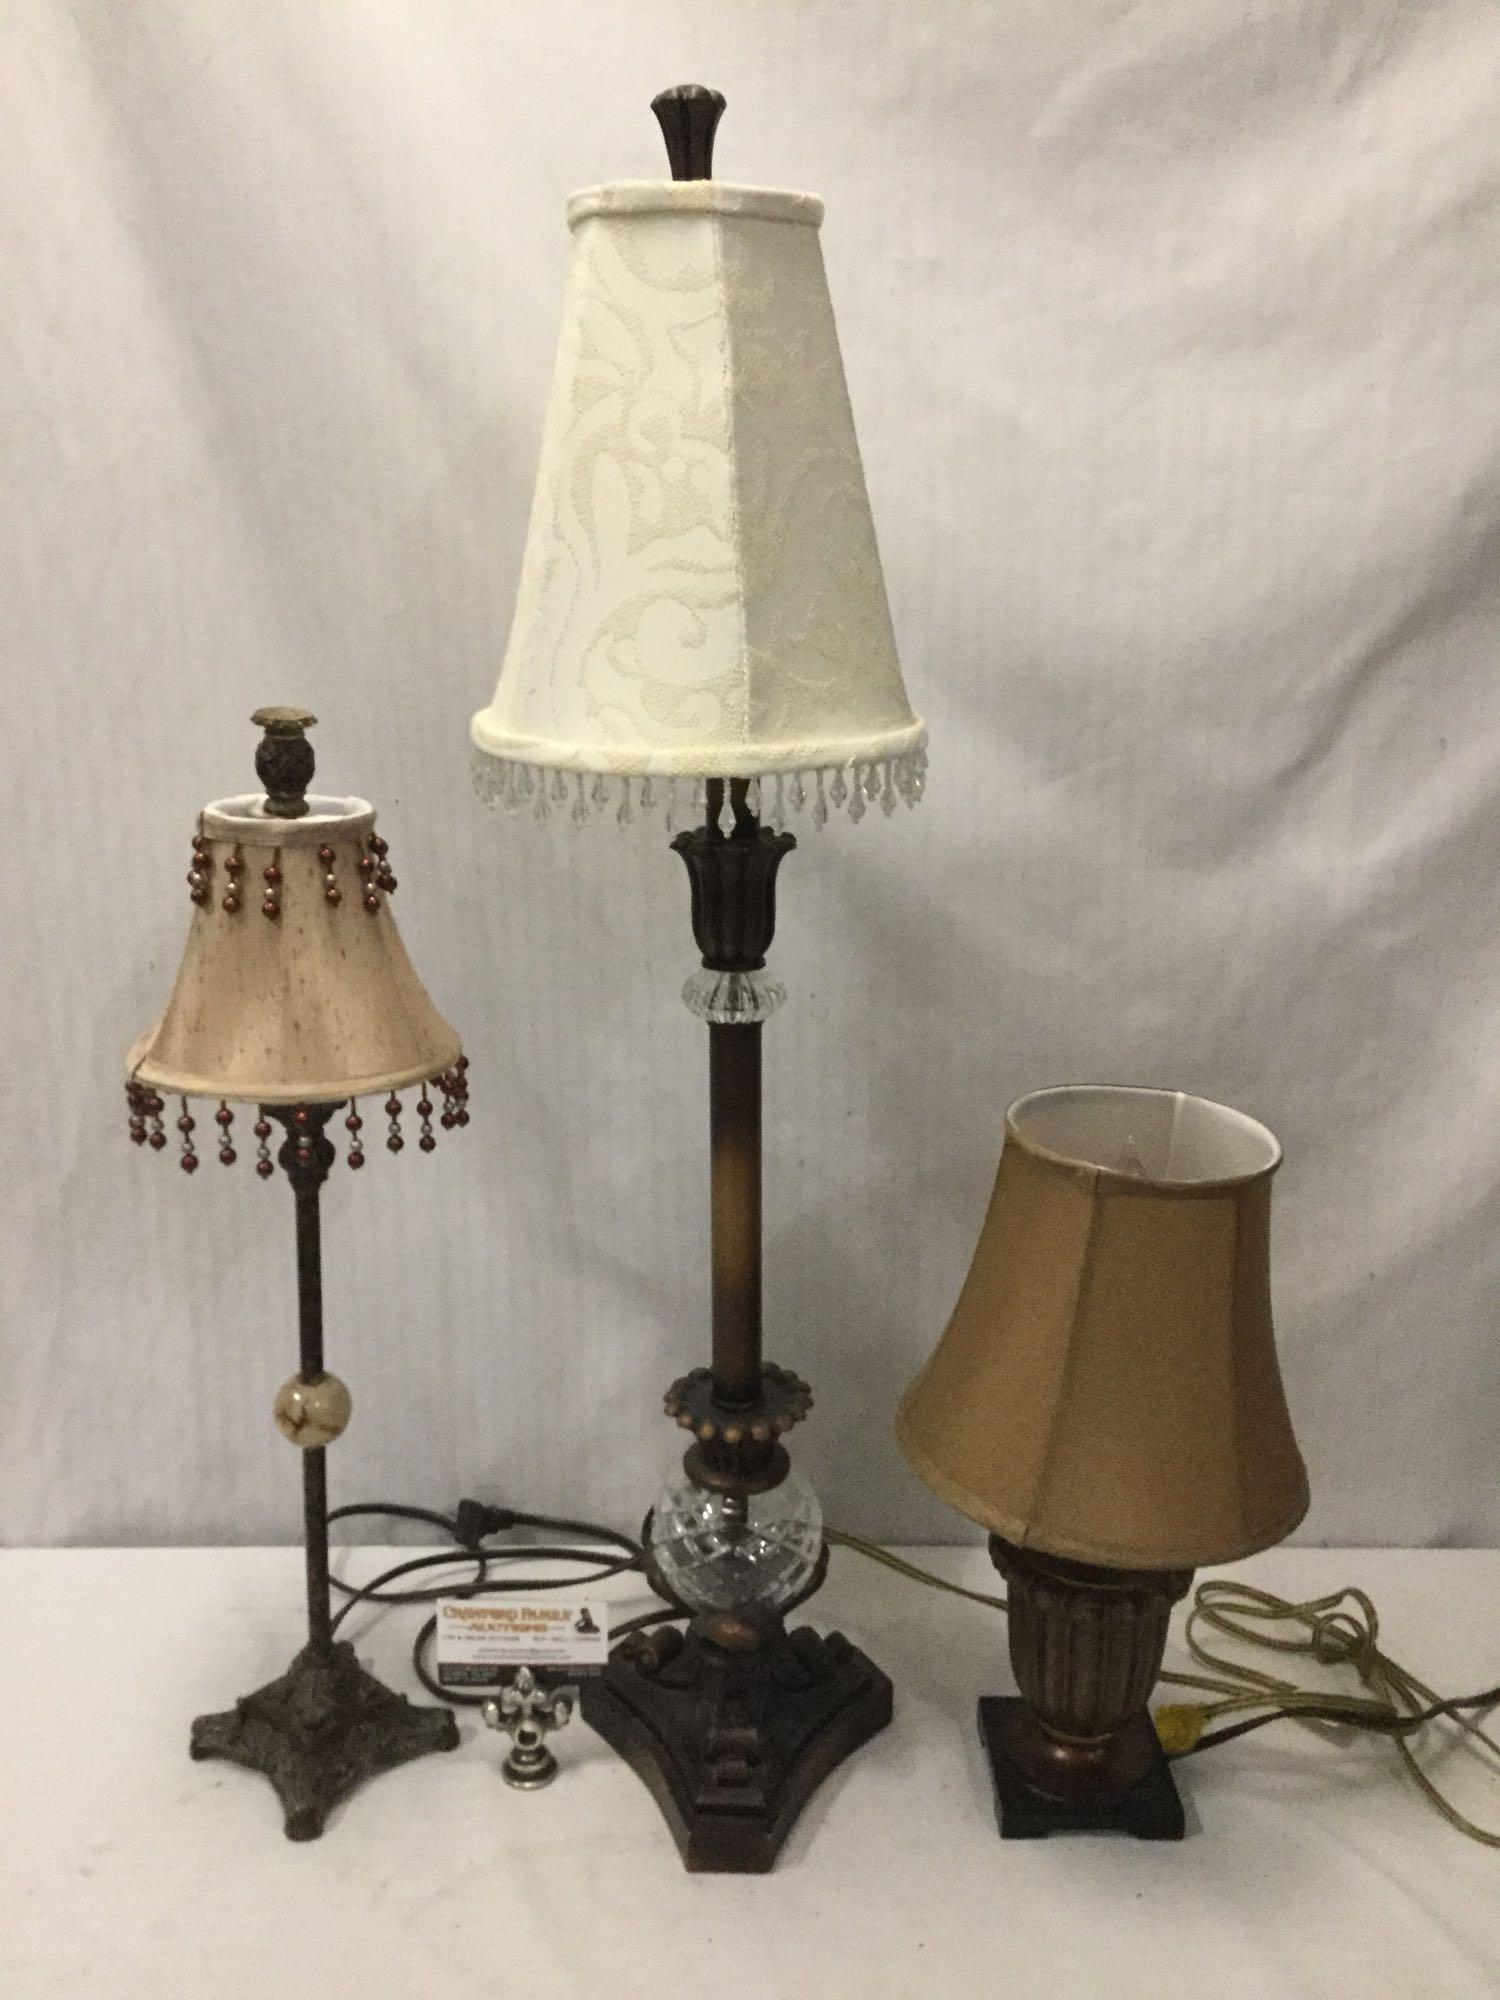 Collection of 3 table lamps, metal, glass and more. All tested and working. Largest approx 33x8x8 in